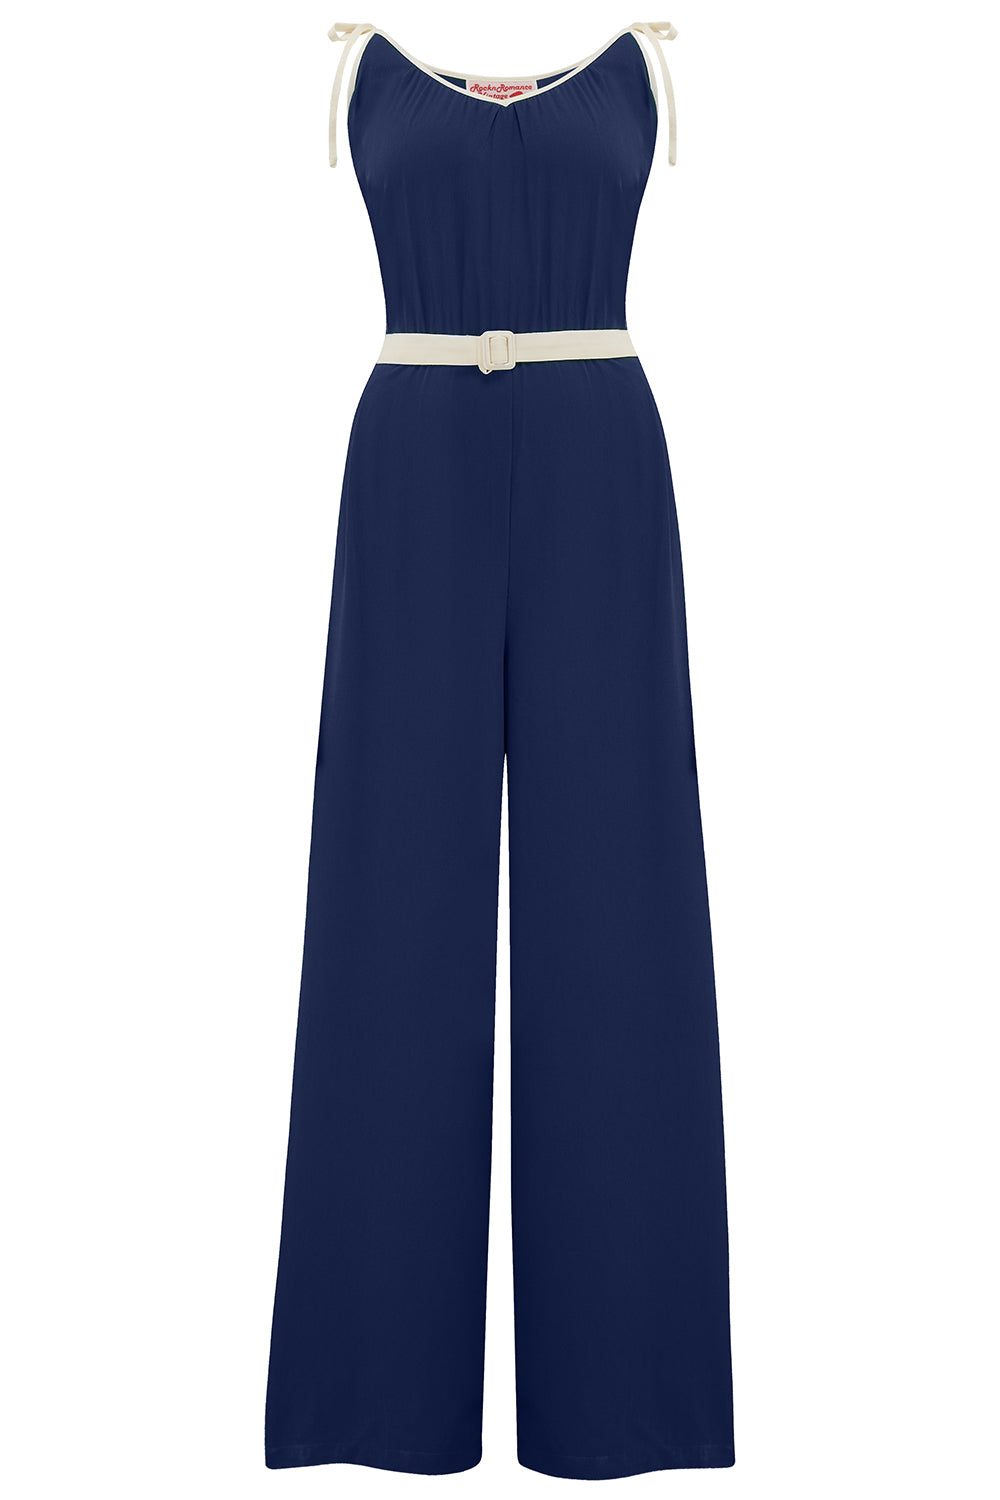 1950s Pants, Jeans, Jumpsuits- High Waist, Wide Leg, Capri, Pedal Pushers The Marcie Jump Suit in Navy Blue With Ivory Contrasts True  Authentic 1950s Vintage Style £49.00 AT vintagedancer.com